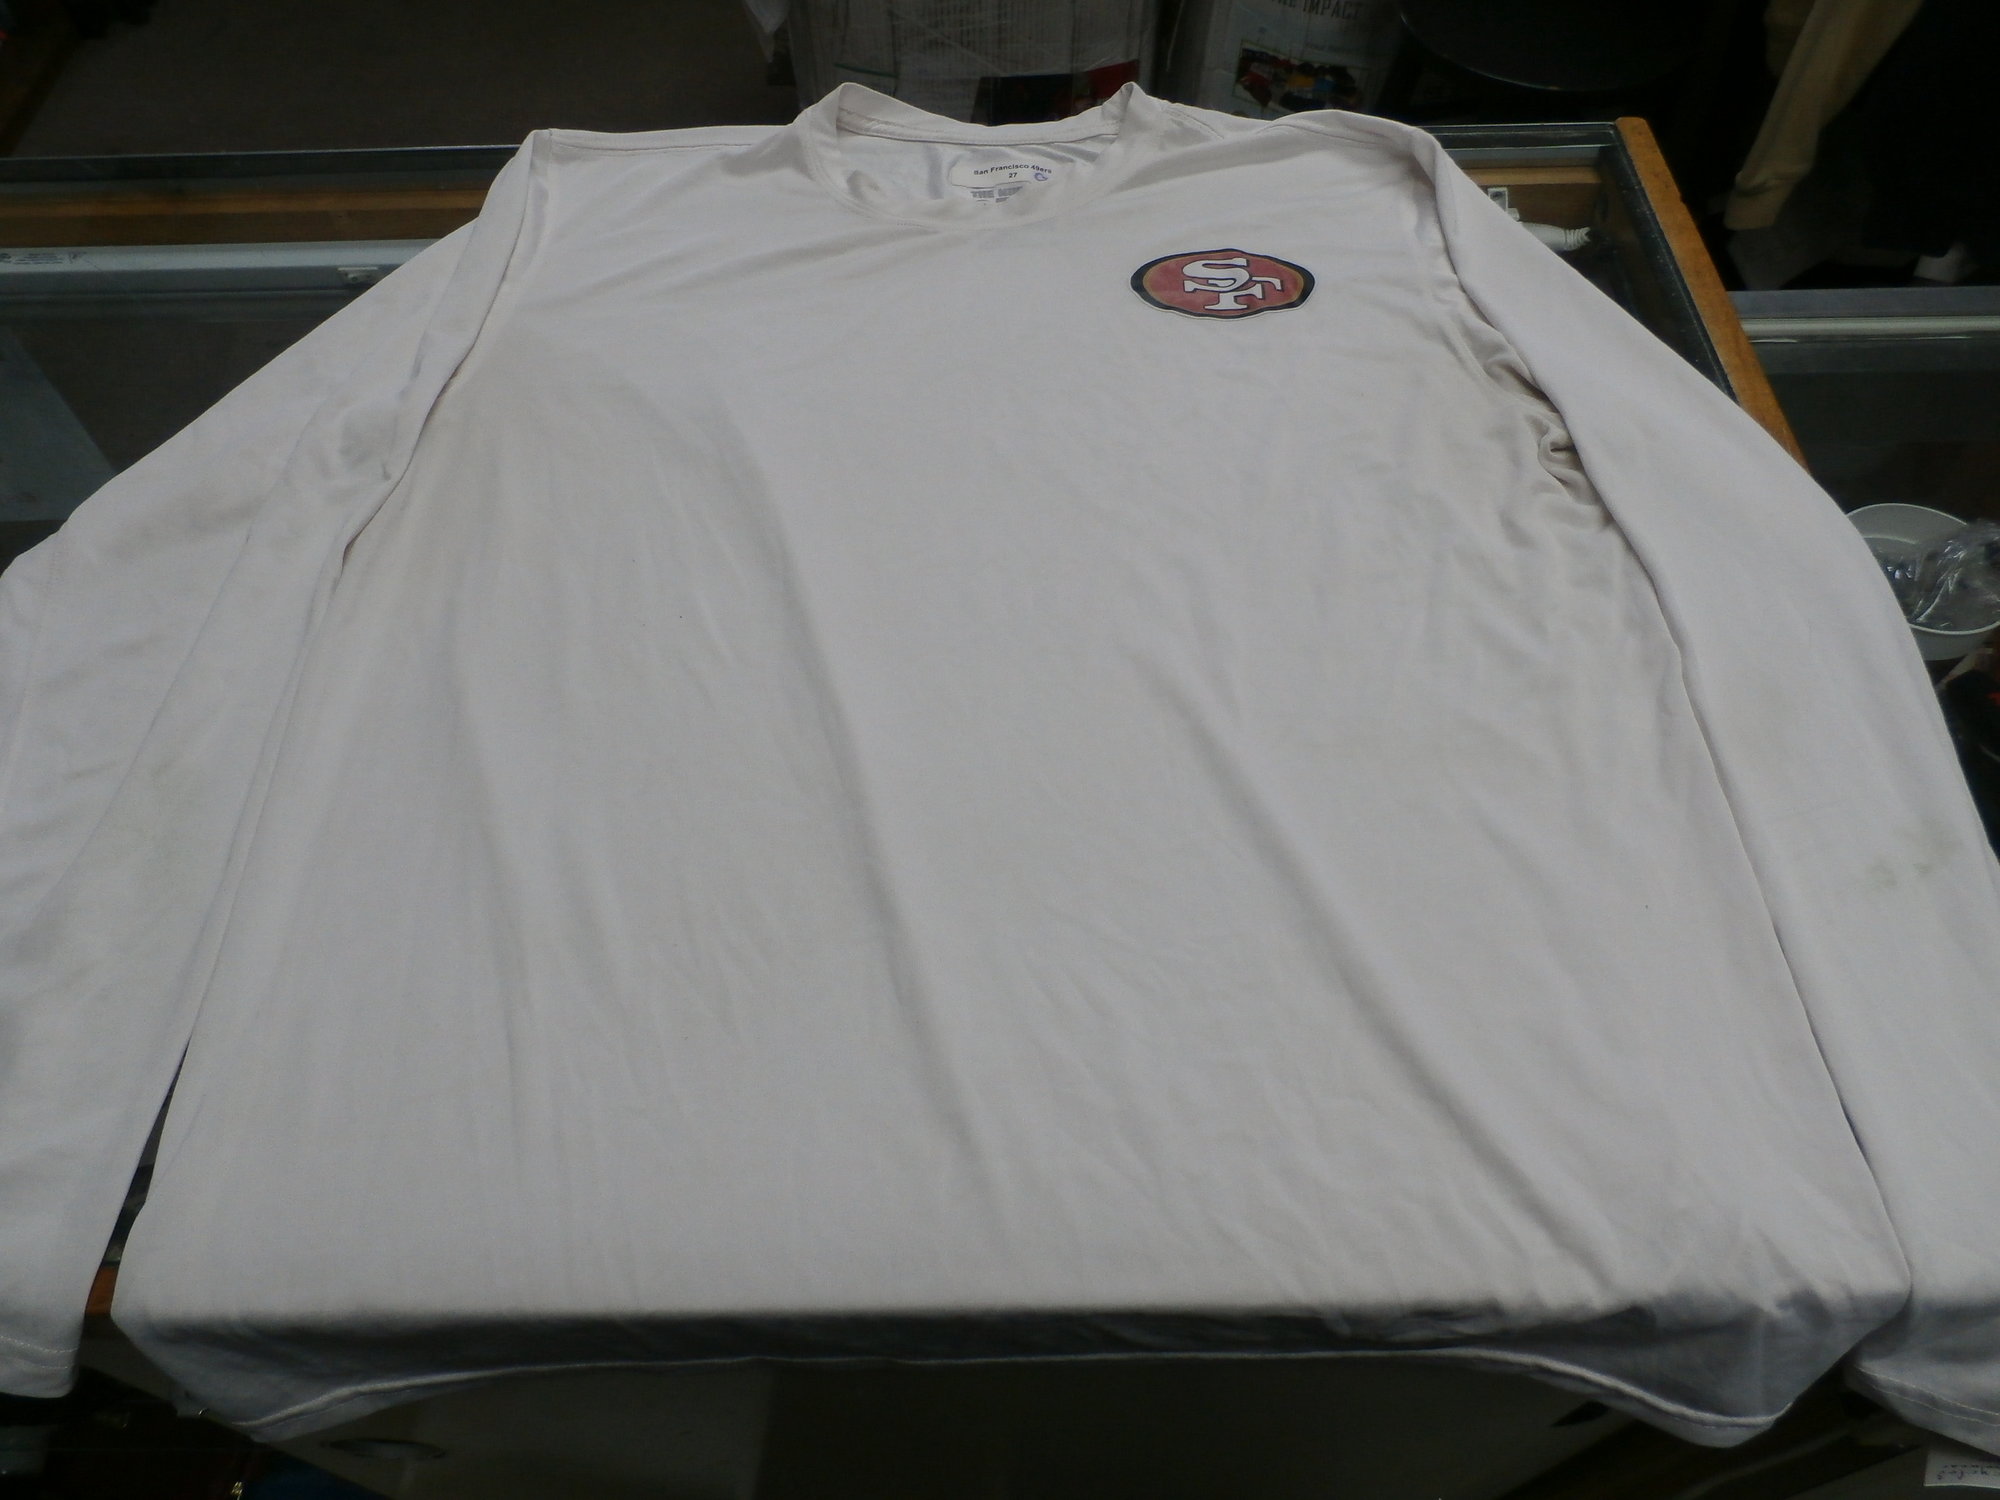 SF 49ers LS, White, Size: Large
Nike Men's San Francisco 49er's long sleeve shirt white size Large poly #28718
Rating: (see below) 4- Fair Condition
Team: San Francisco 49er's
Player: N/A
Brand: Nike
Size:  Men's Large  (Measured Flat: Across chest 21\"; Length 27\")
Measured Laying Flat: armpit to armpit; top of shoulder to bottom hem
Color: White
Style: Long sleeve shirt; Screen pressed
Material: 100% Polyester
Condition: 4- Fair Condition: wrinkled; minor pilling and fuzz; discoloration from use; some light staining on front; black stains on the right sleeve; light staining on left sleeve;
Item #: 28718
Shipping: FREE